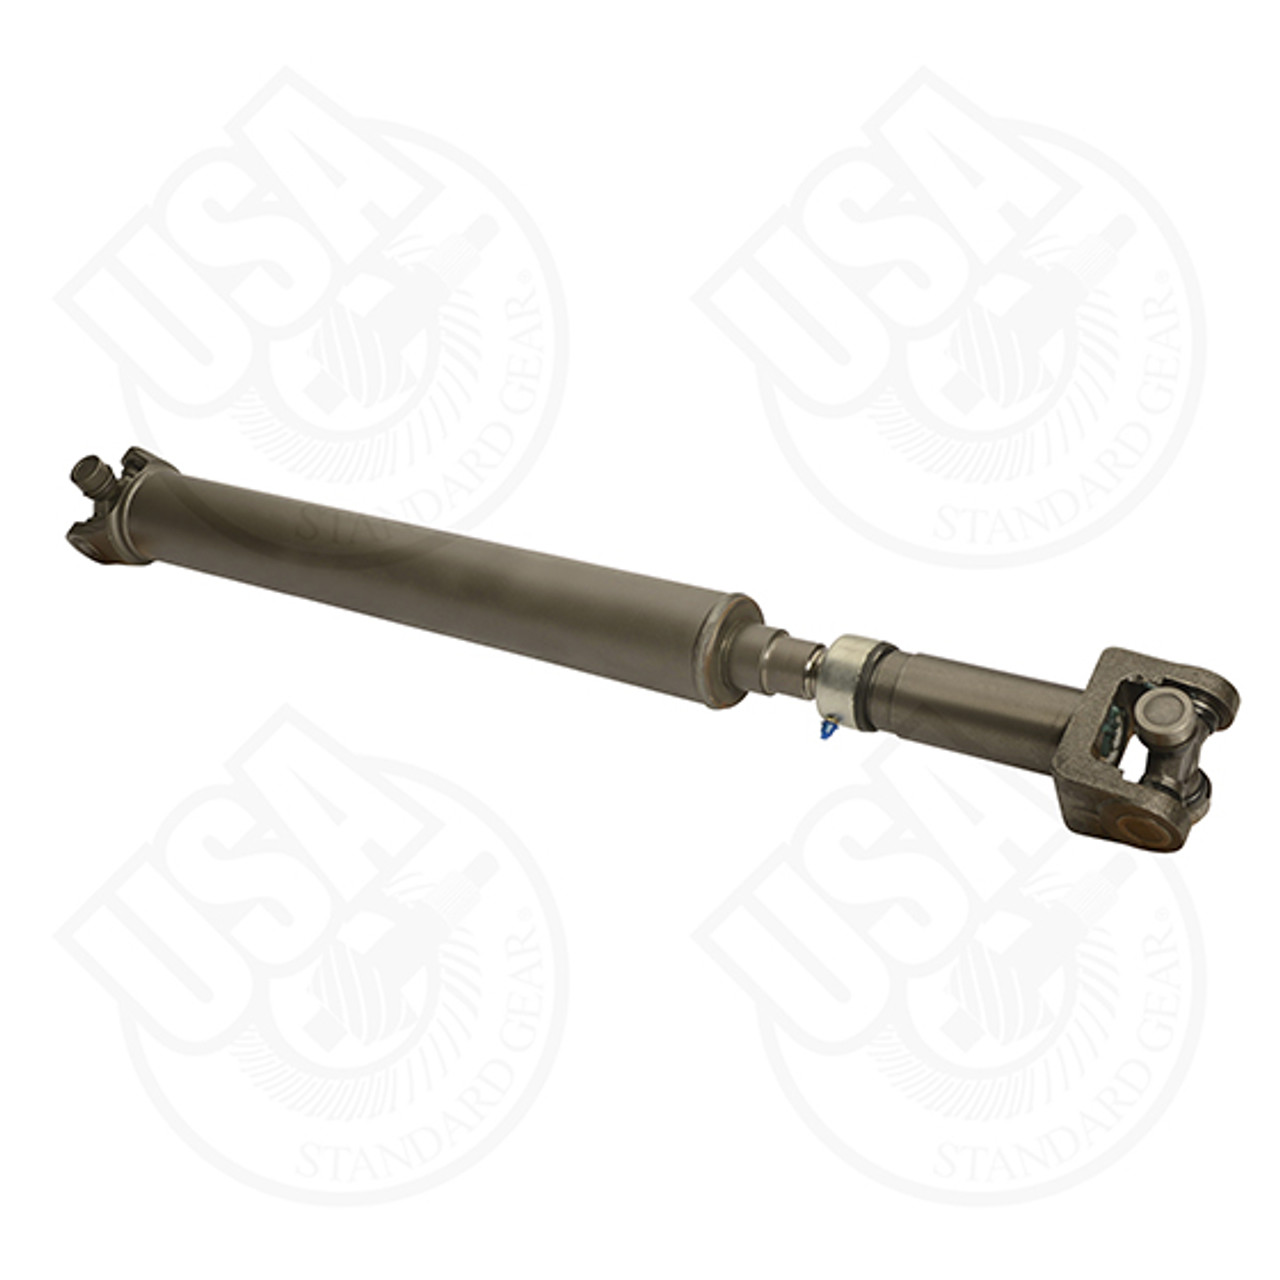 NEW USA Standard Front Driveshaft for Bronco & f-Series Trucks, 39-1/2" Center to Center